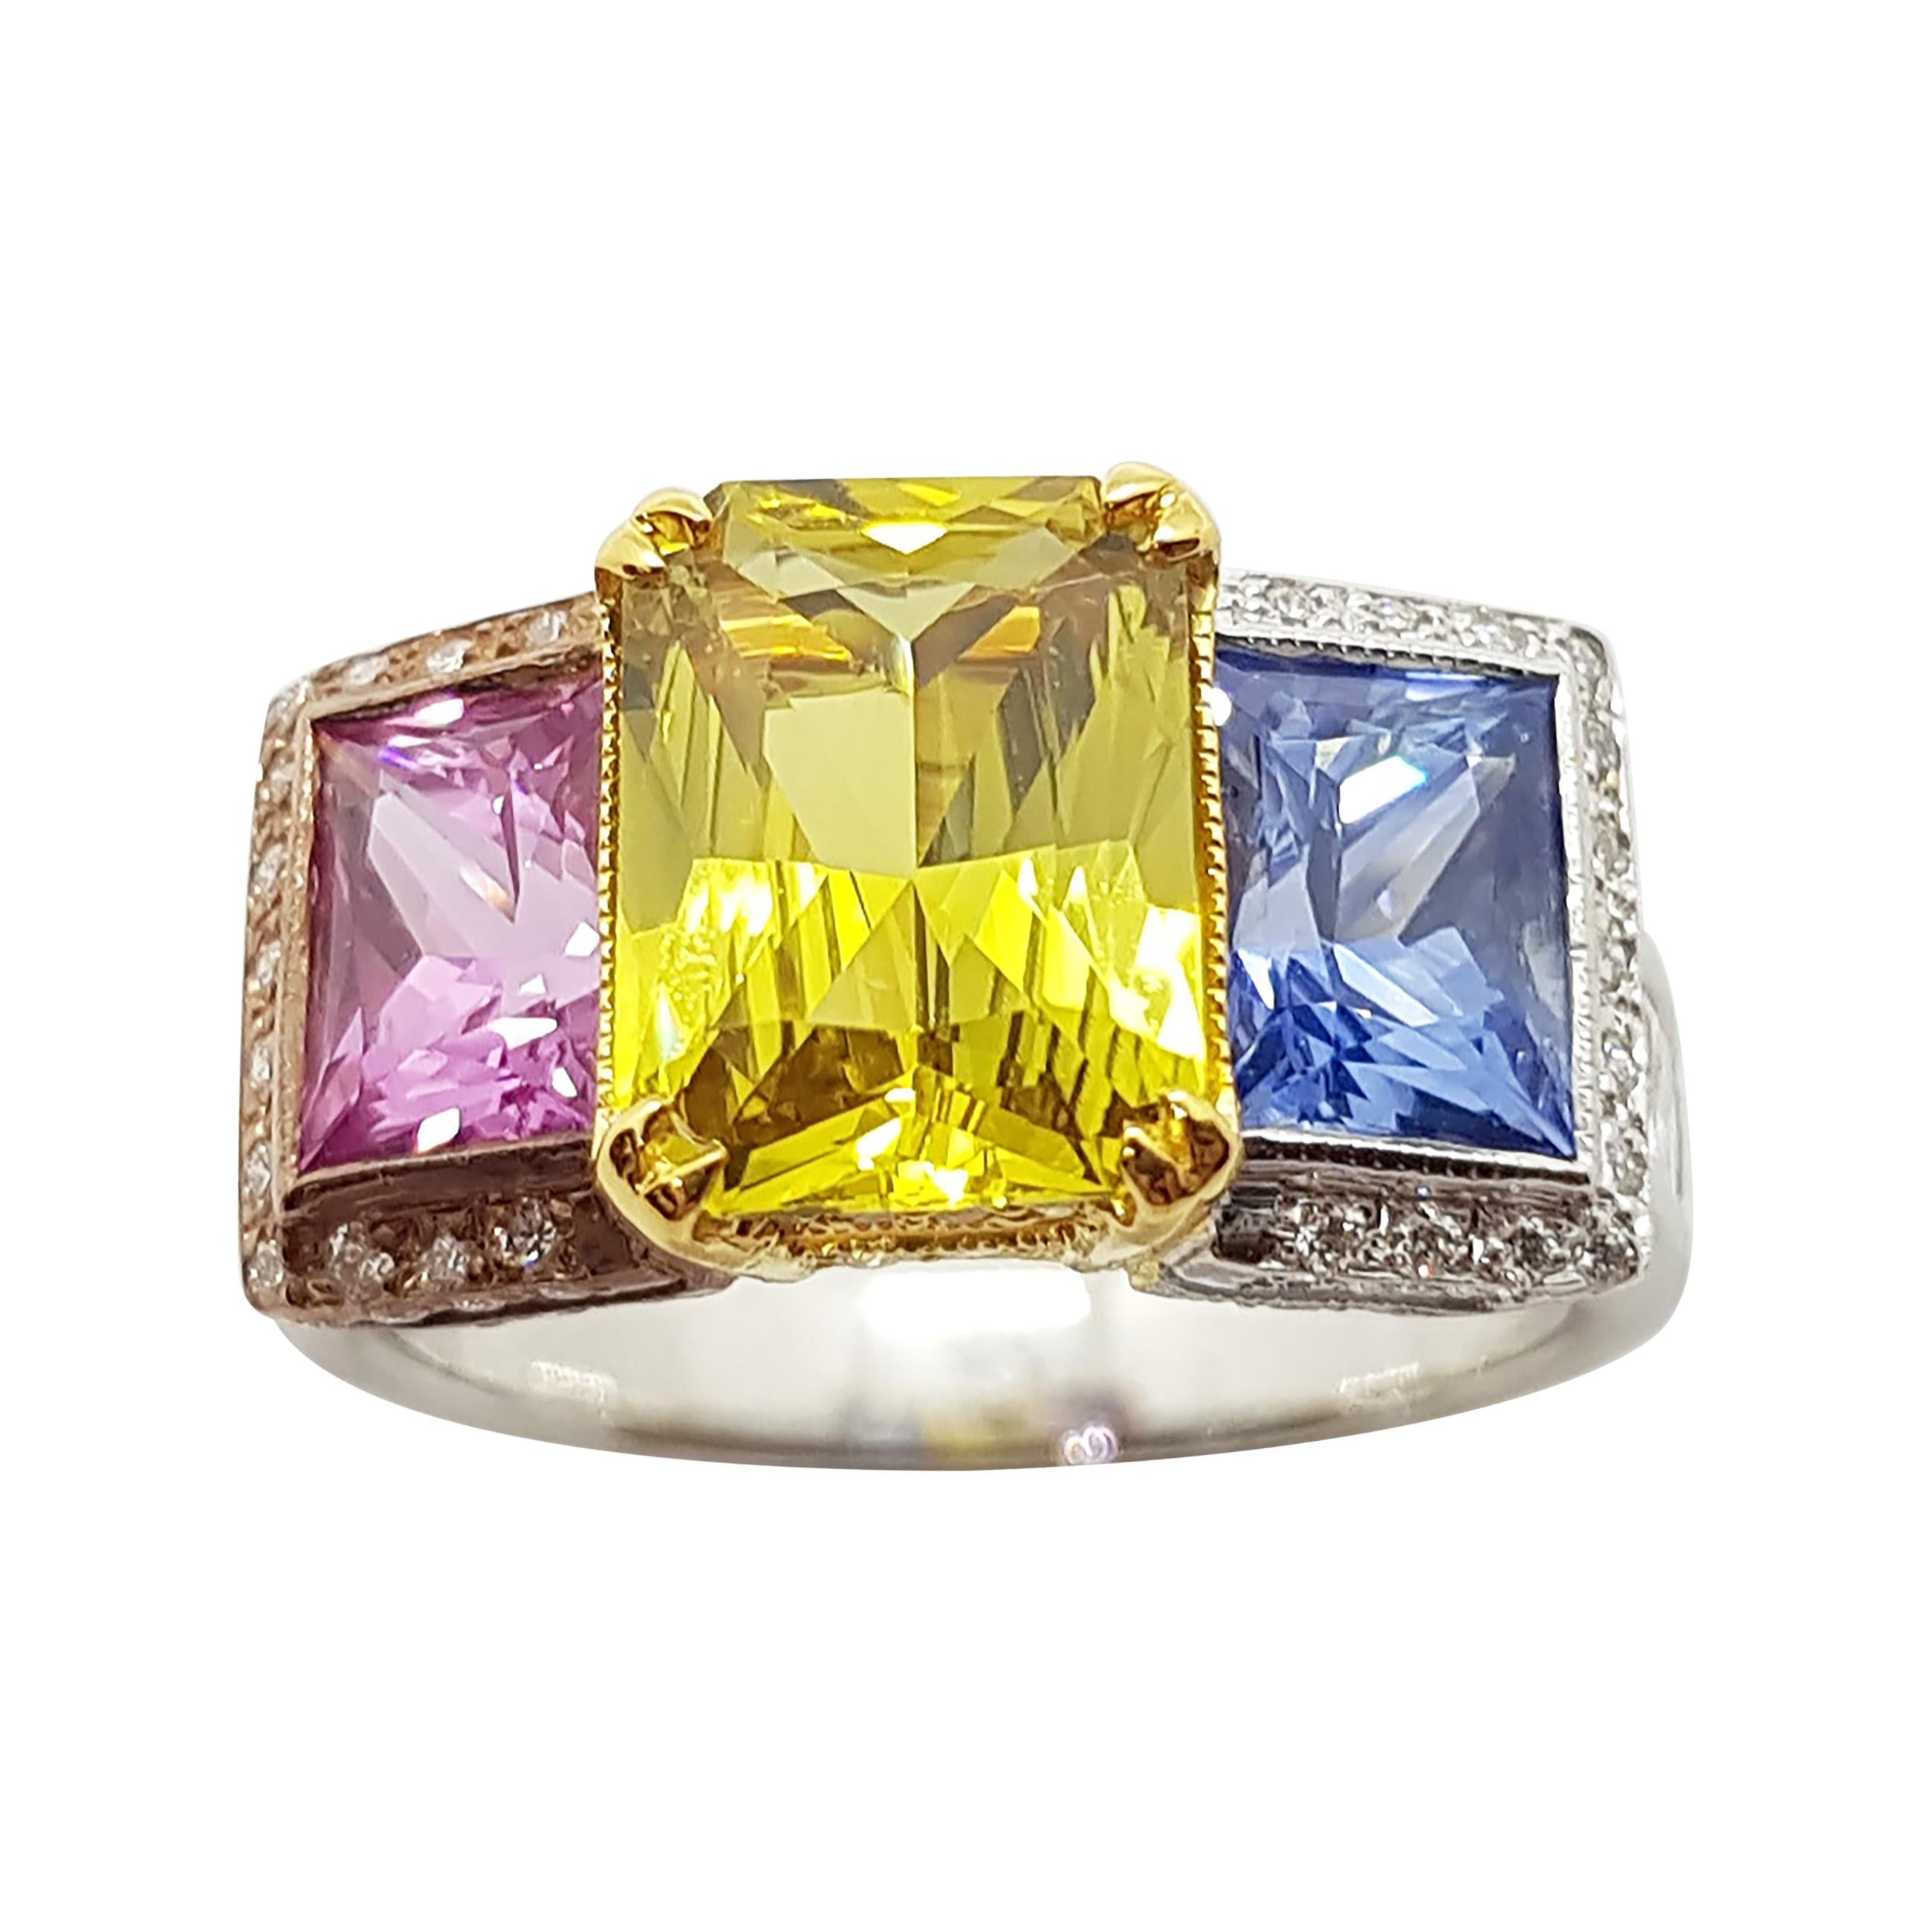 Blue Sapphire, Pink Sapphire, Yellow Sapphire Ring Set in 18 Karat White Gold For Sale